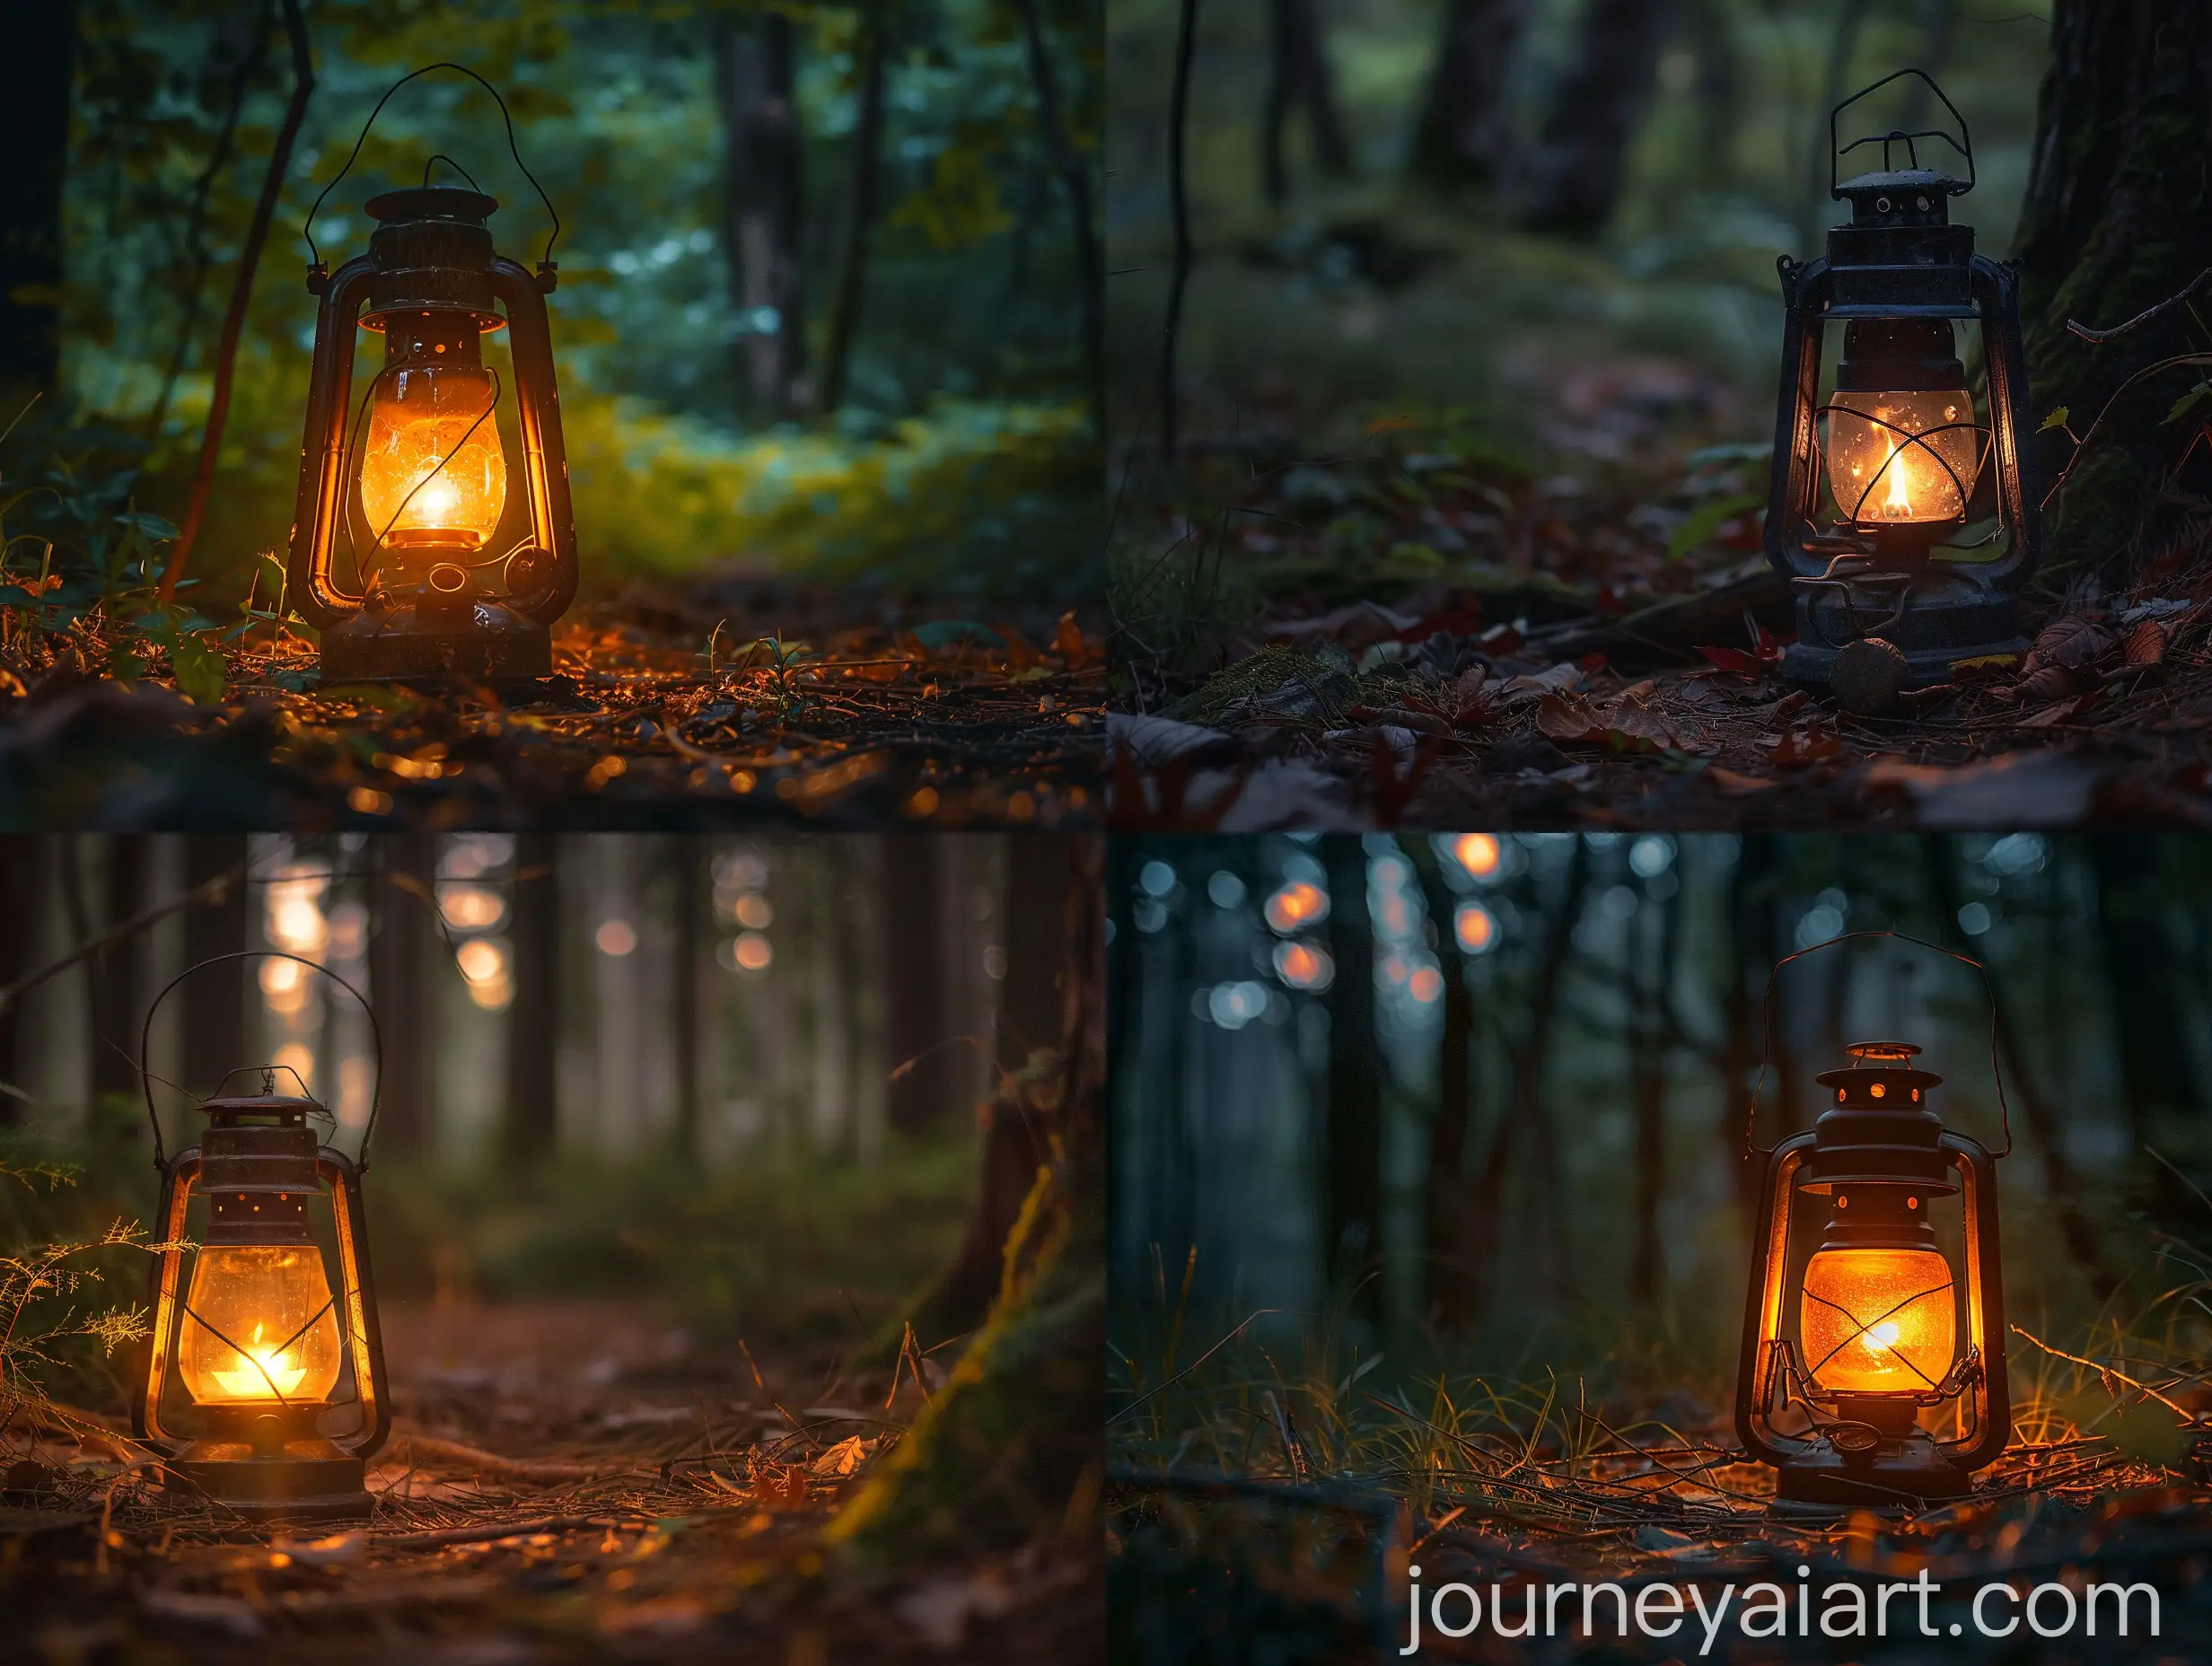 Warm-Glow-of-Vintage-Lantern-in-Forest-Setting